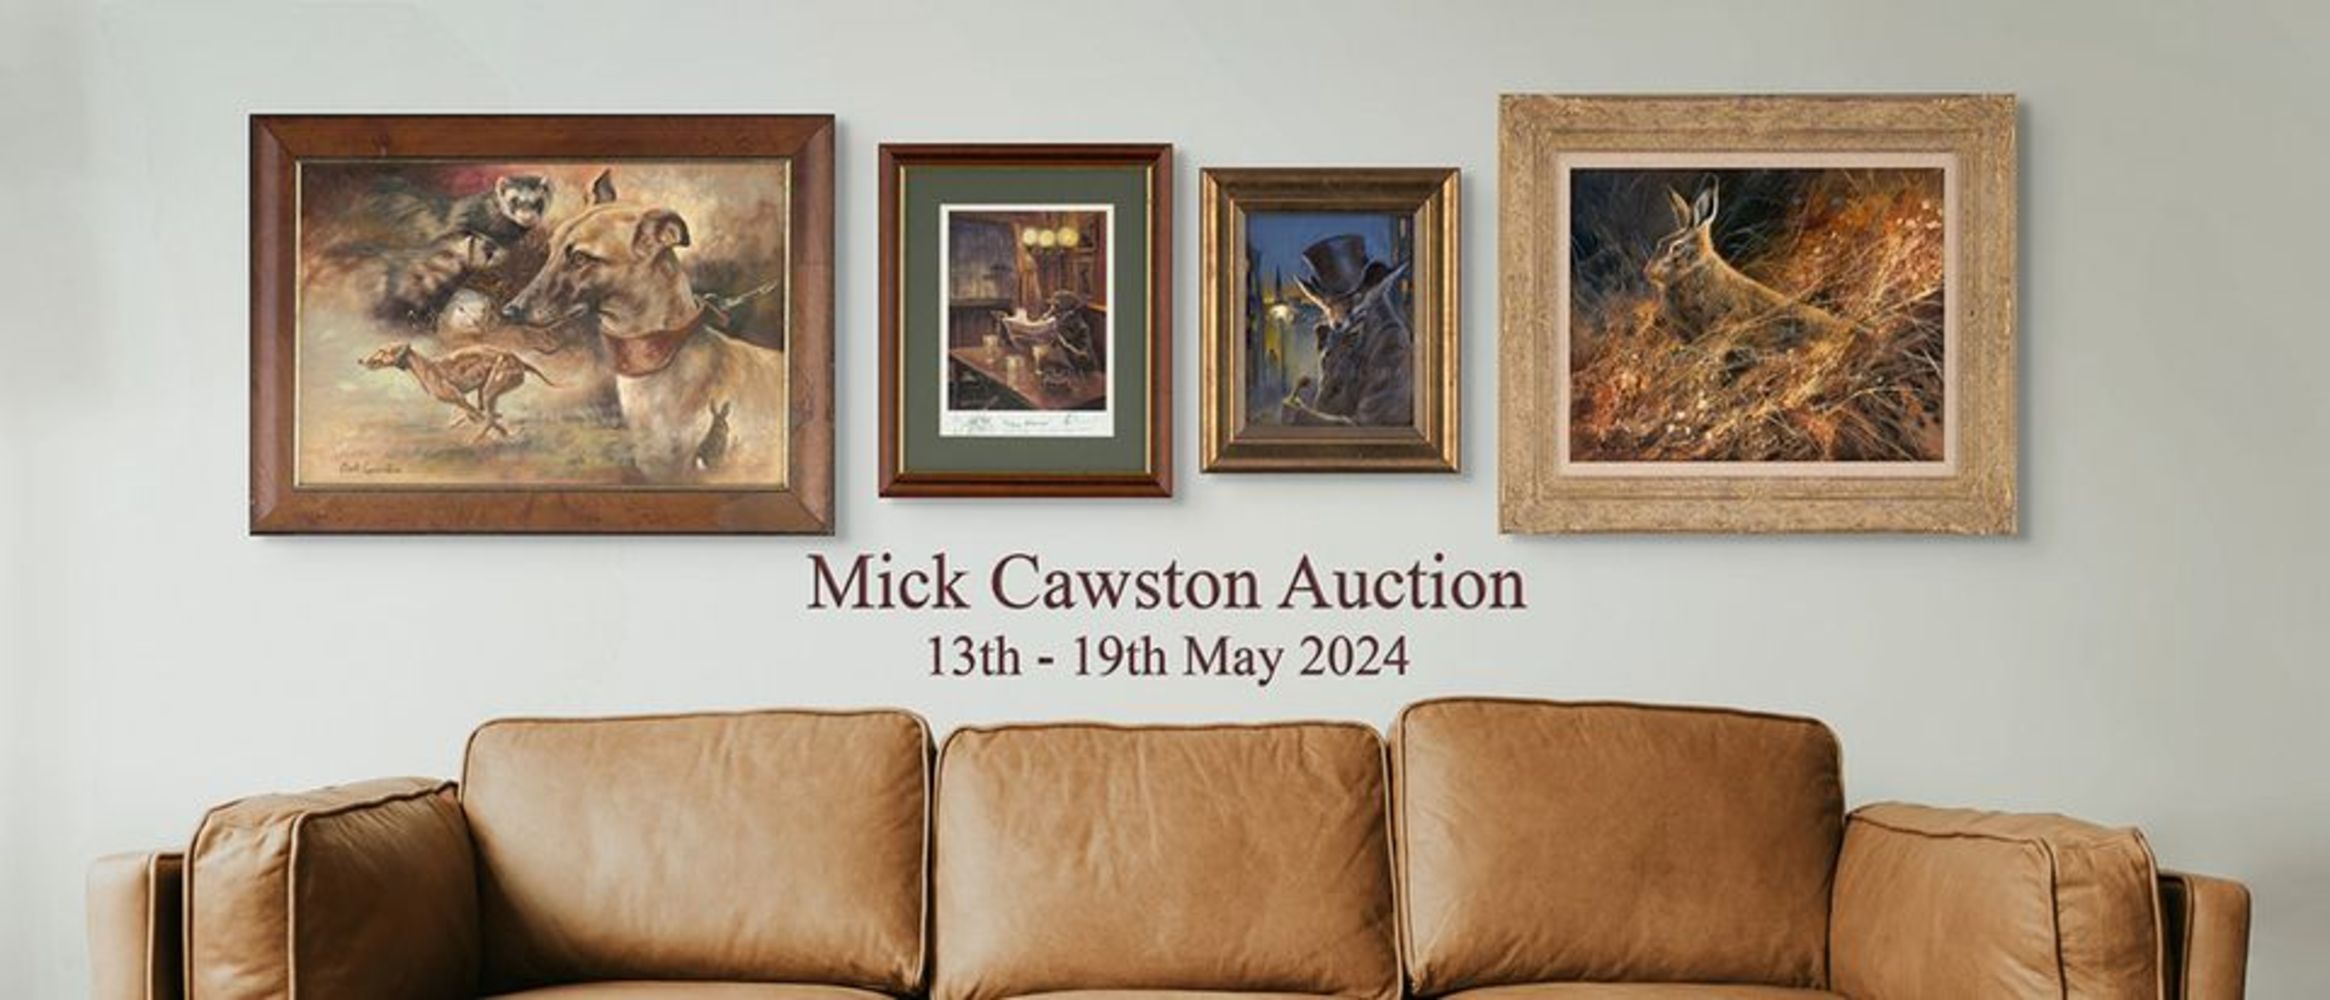 Auction of the Work of Mick Cawston -Timed Sale